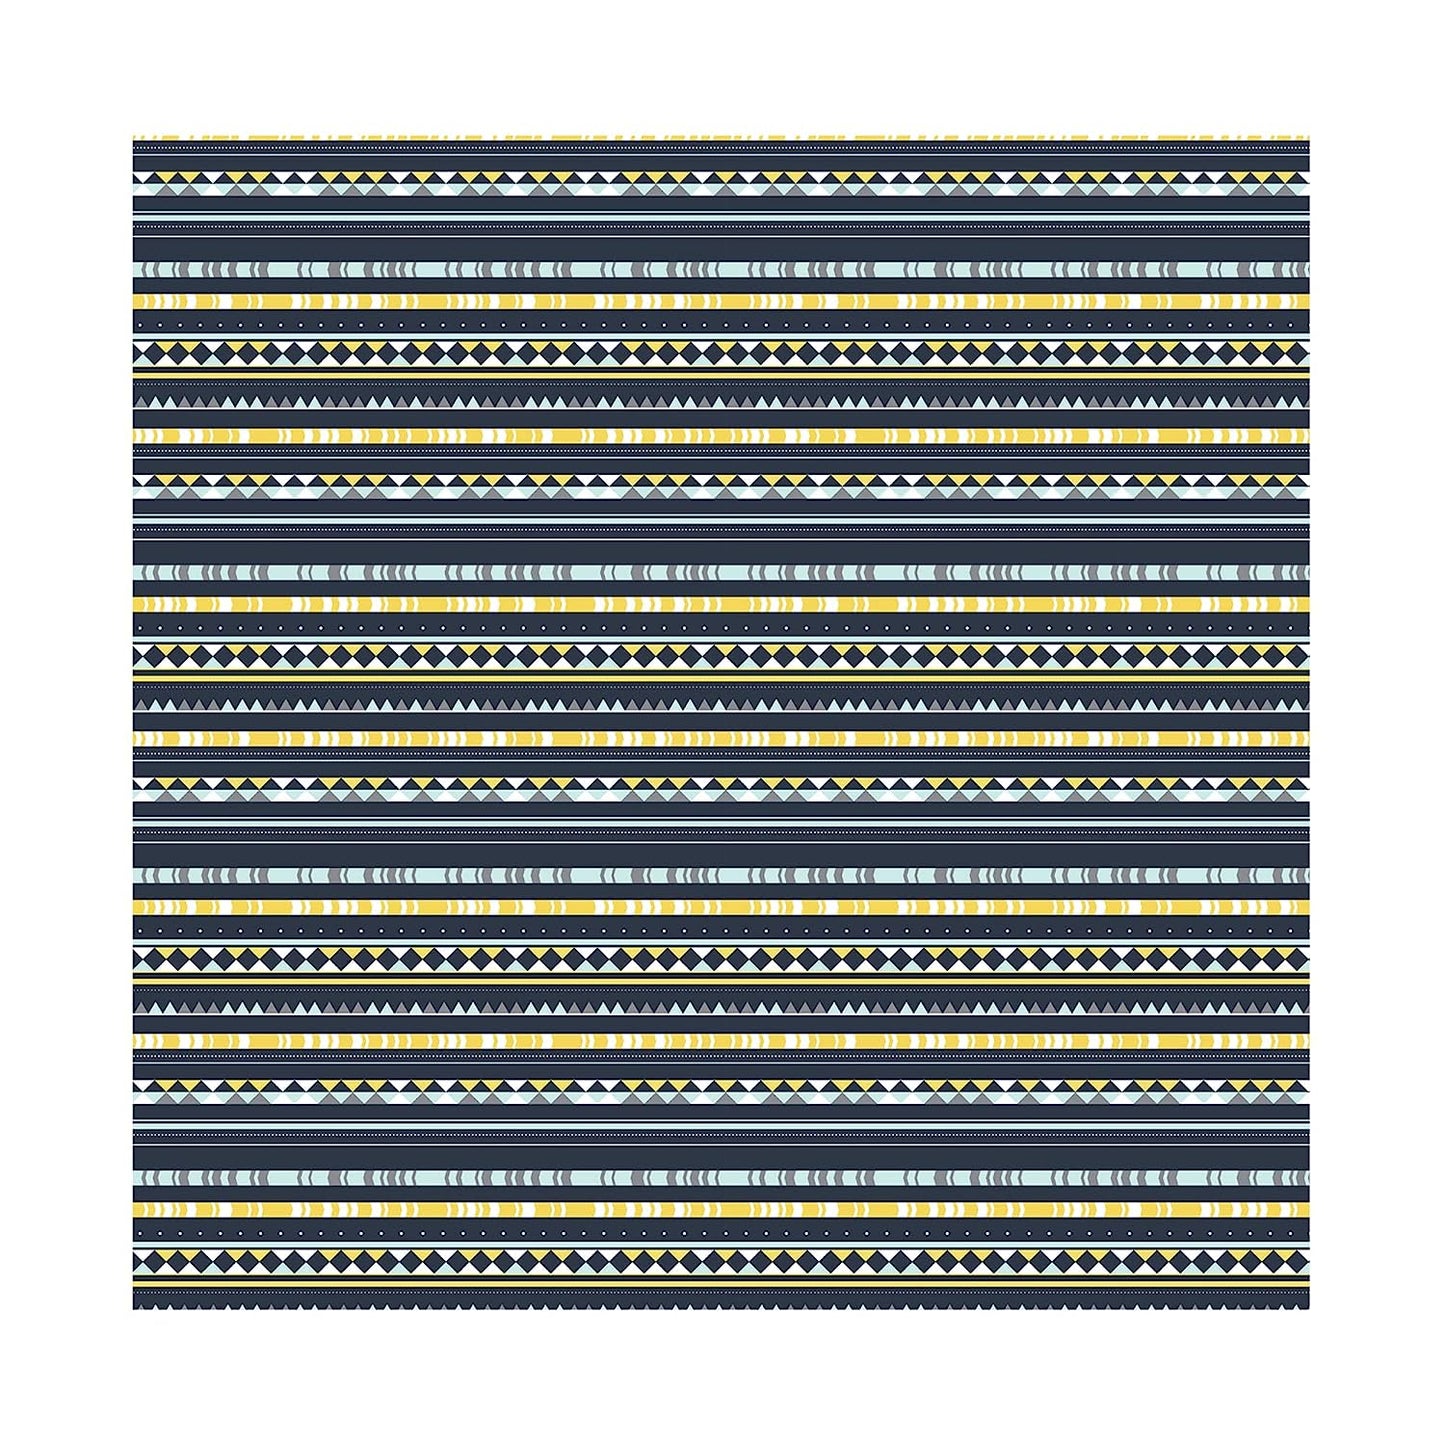 Paperpep Dark Blue Lines Print Gift Wrapping Paper 19"X29" Pack Of 5 Sheets For Gift Packing Birthday, Anniversary, Diwali, Christmas, All Occasions & Events, Crafts, Return Gifts